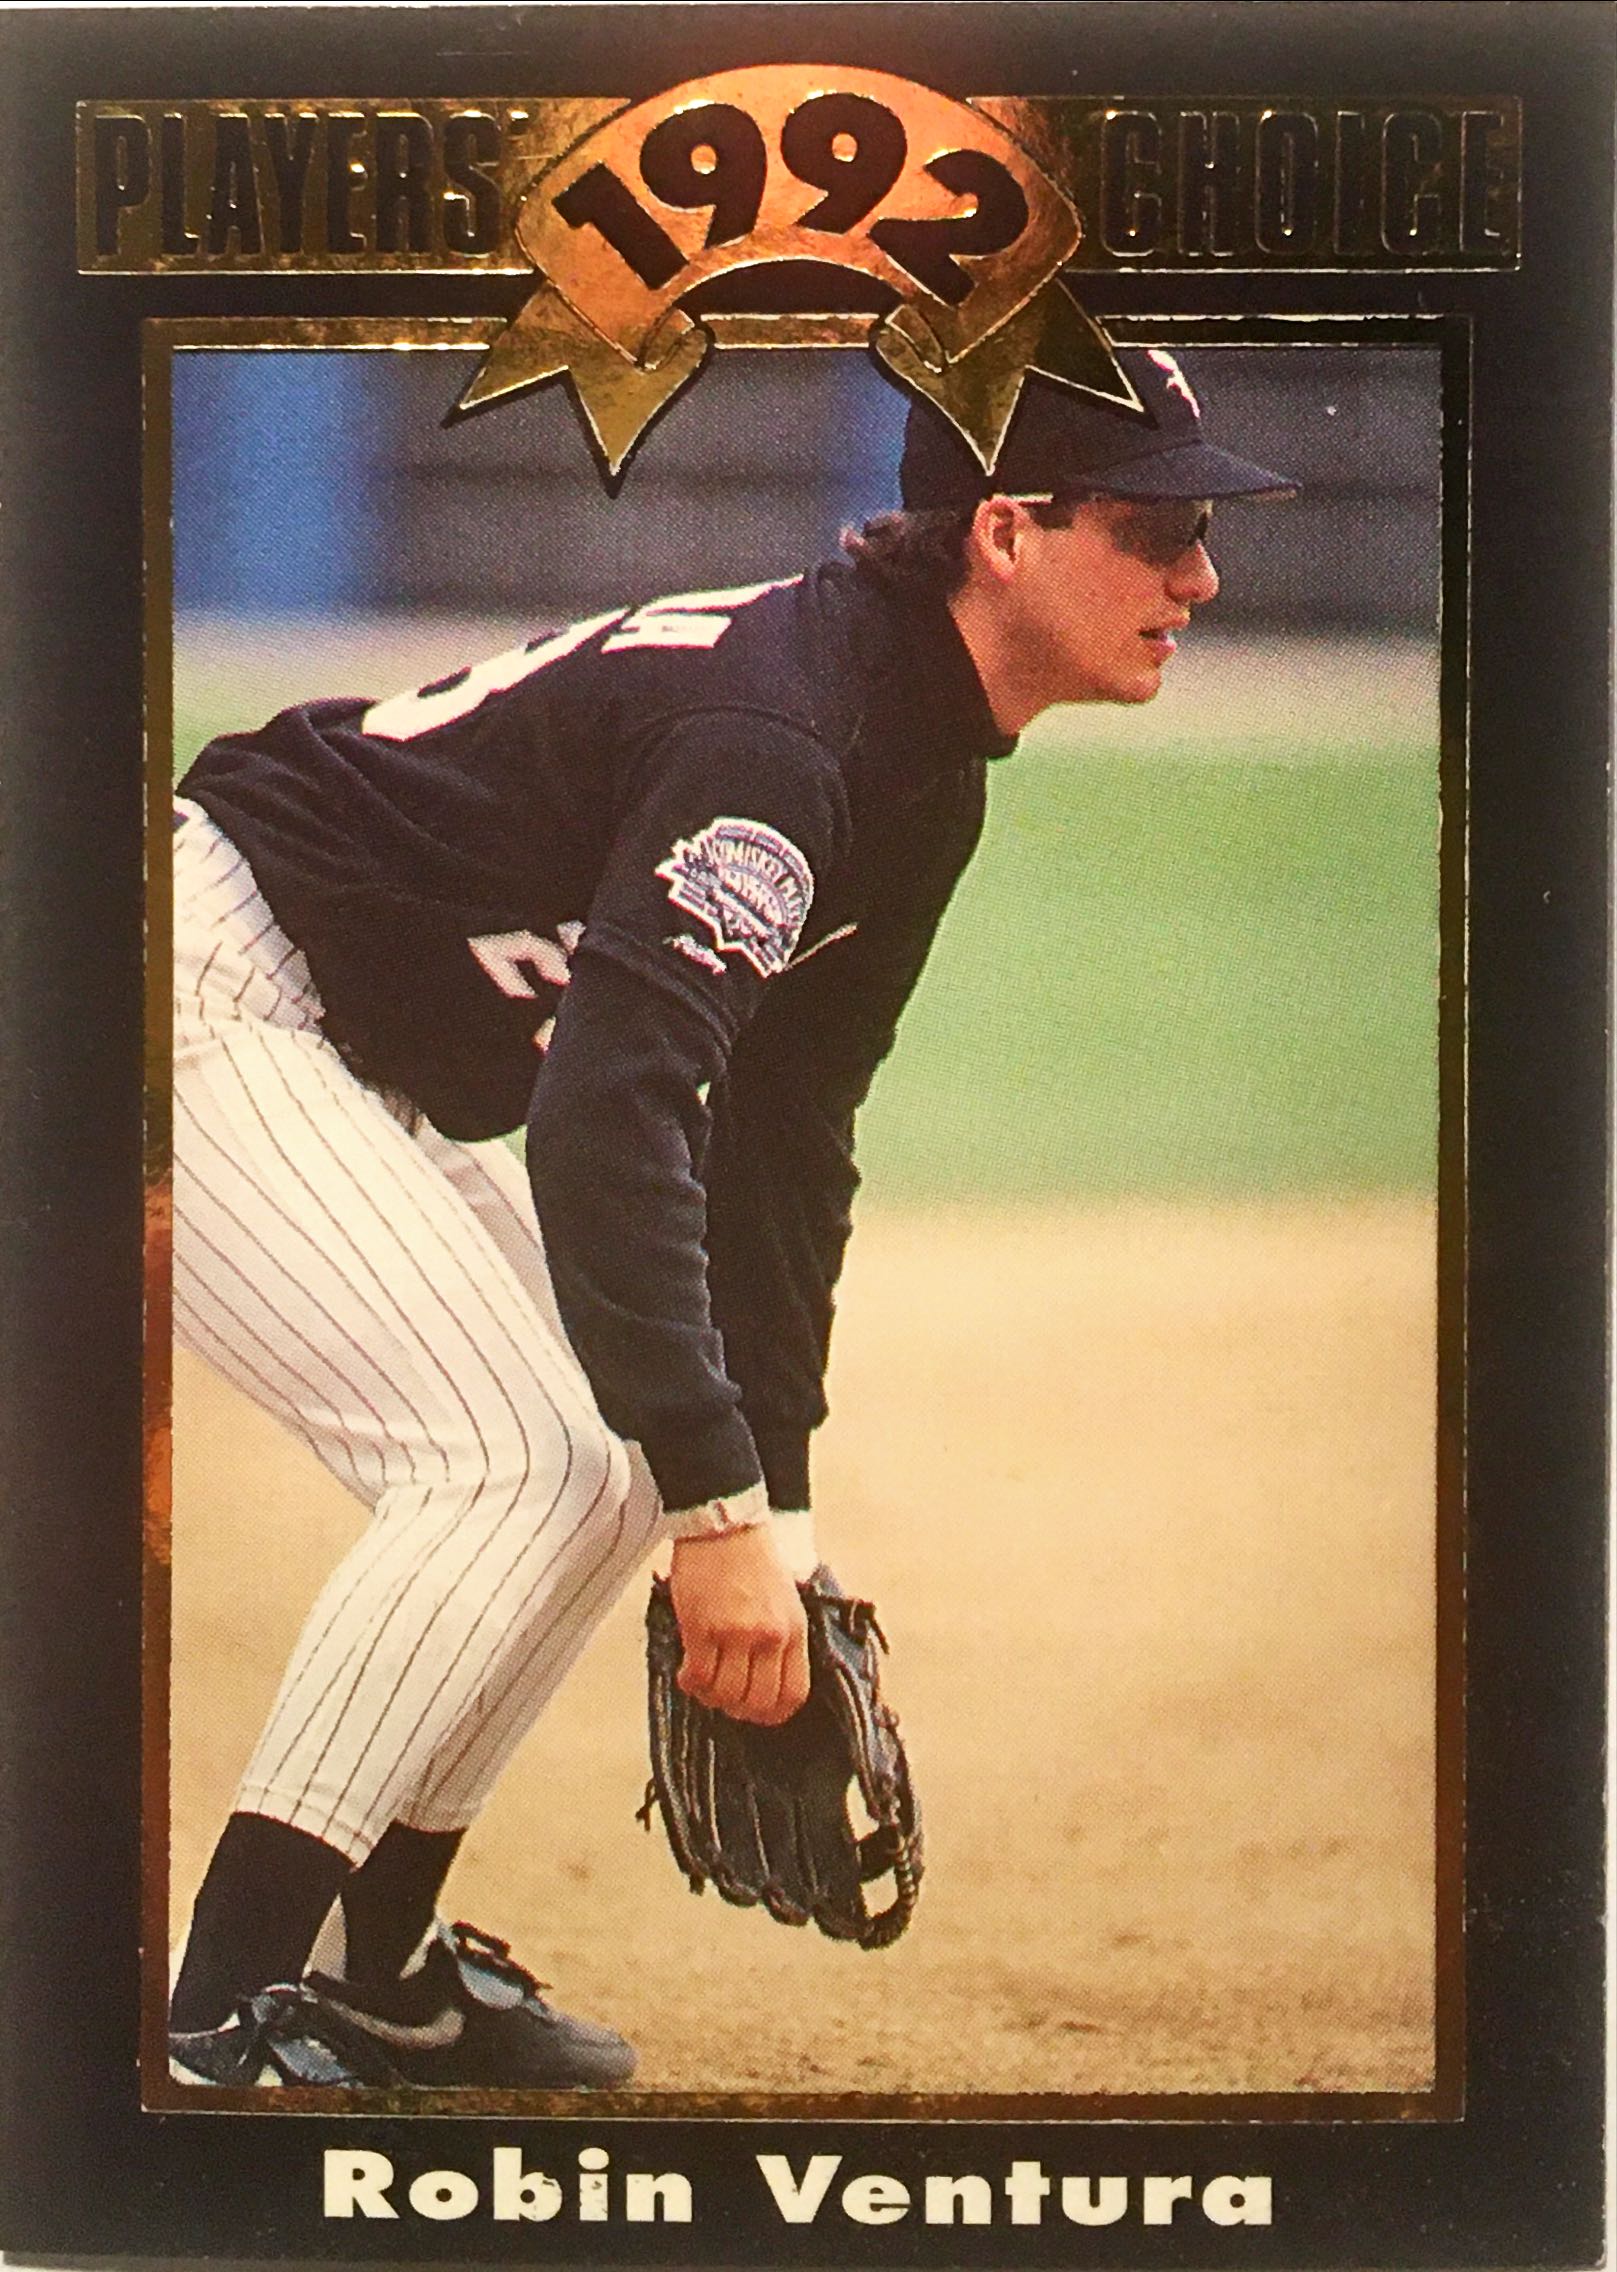 1992 Cartwrights Player Series 17 front image